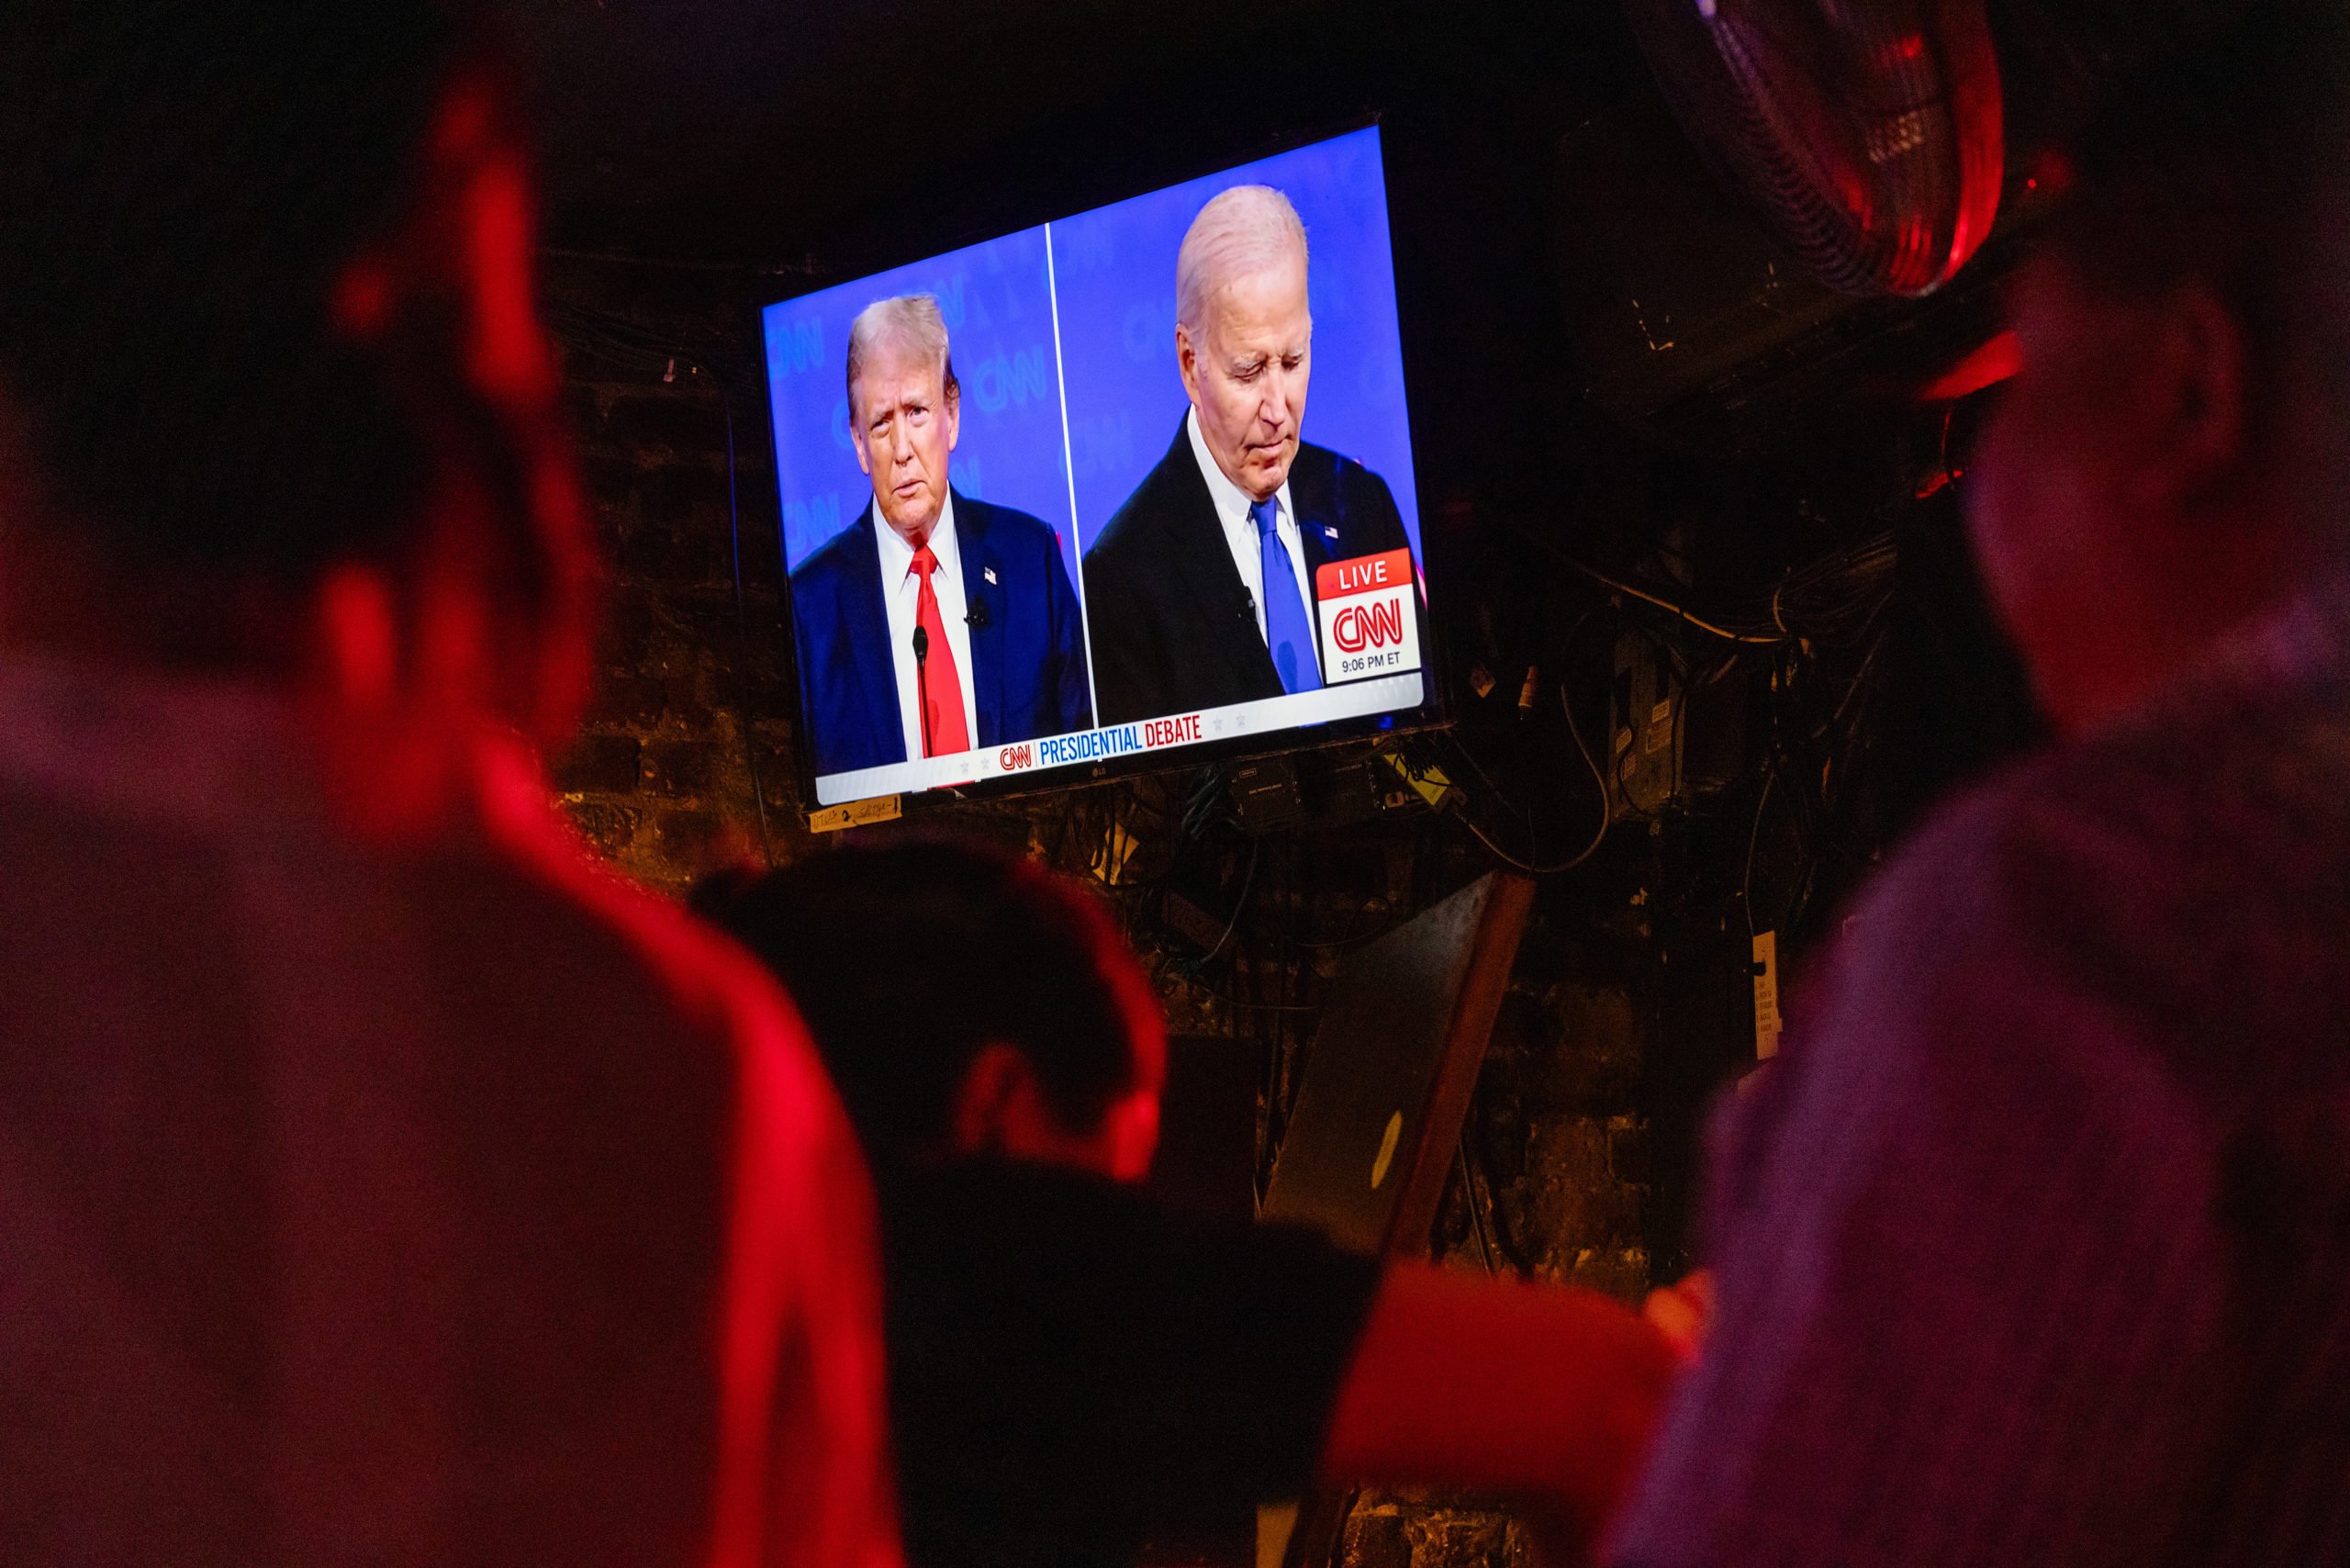 People watch the presidential debate between U.S. President Joe Biden and presumptive Republican nominee, former President Donald Trump at Wicked Willy's on June 27, 2024 in New York City. (Photo by Michael M. Santiago/Getty Images)